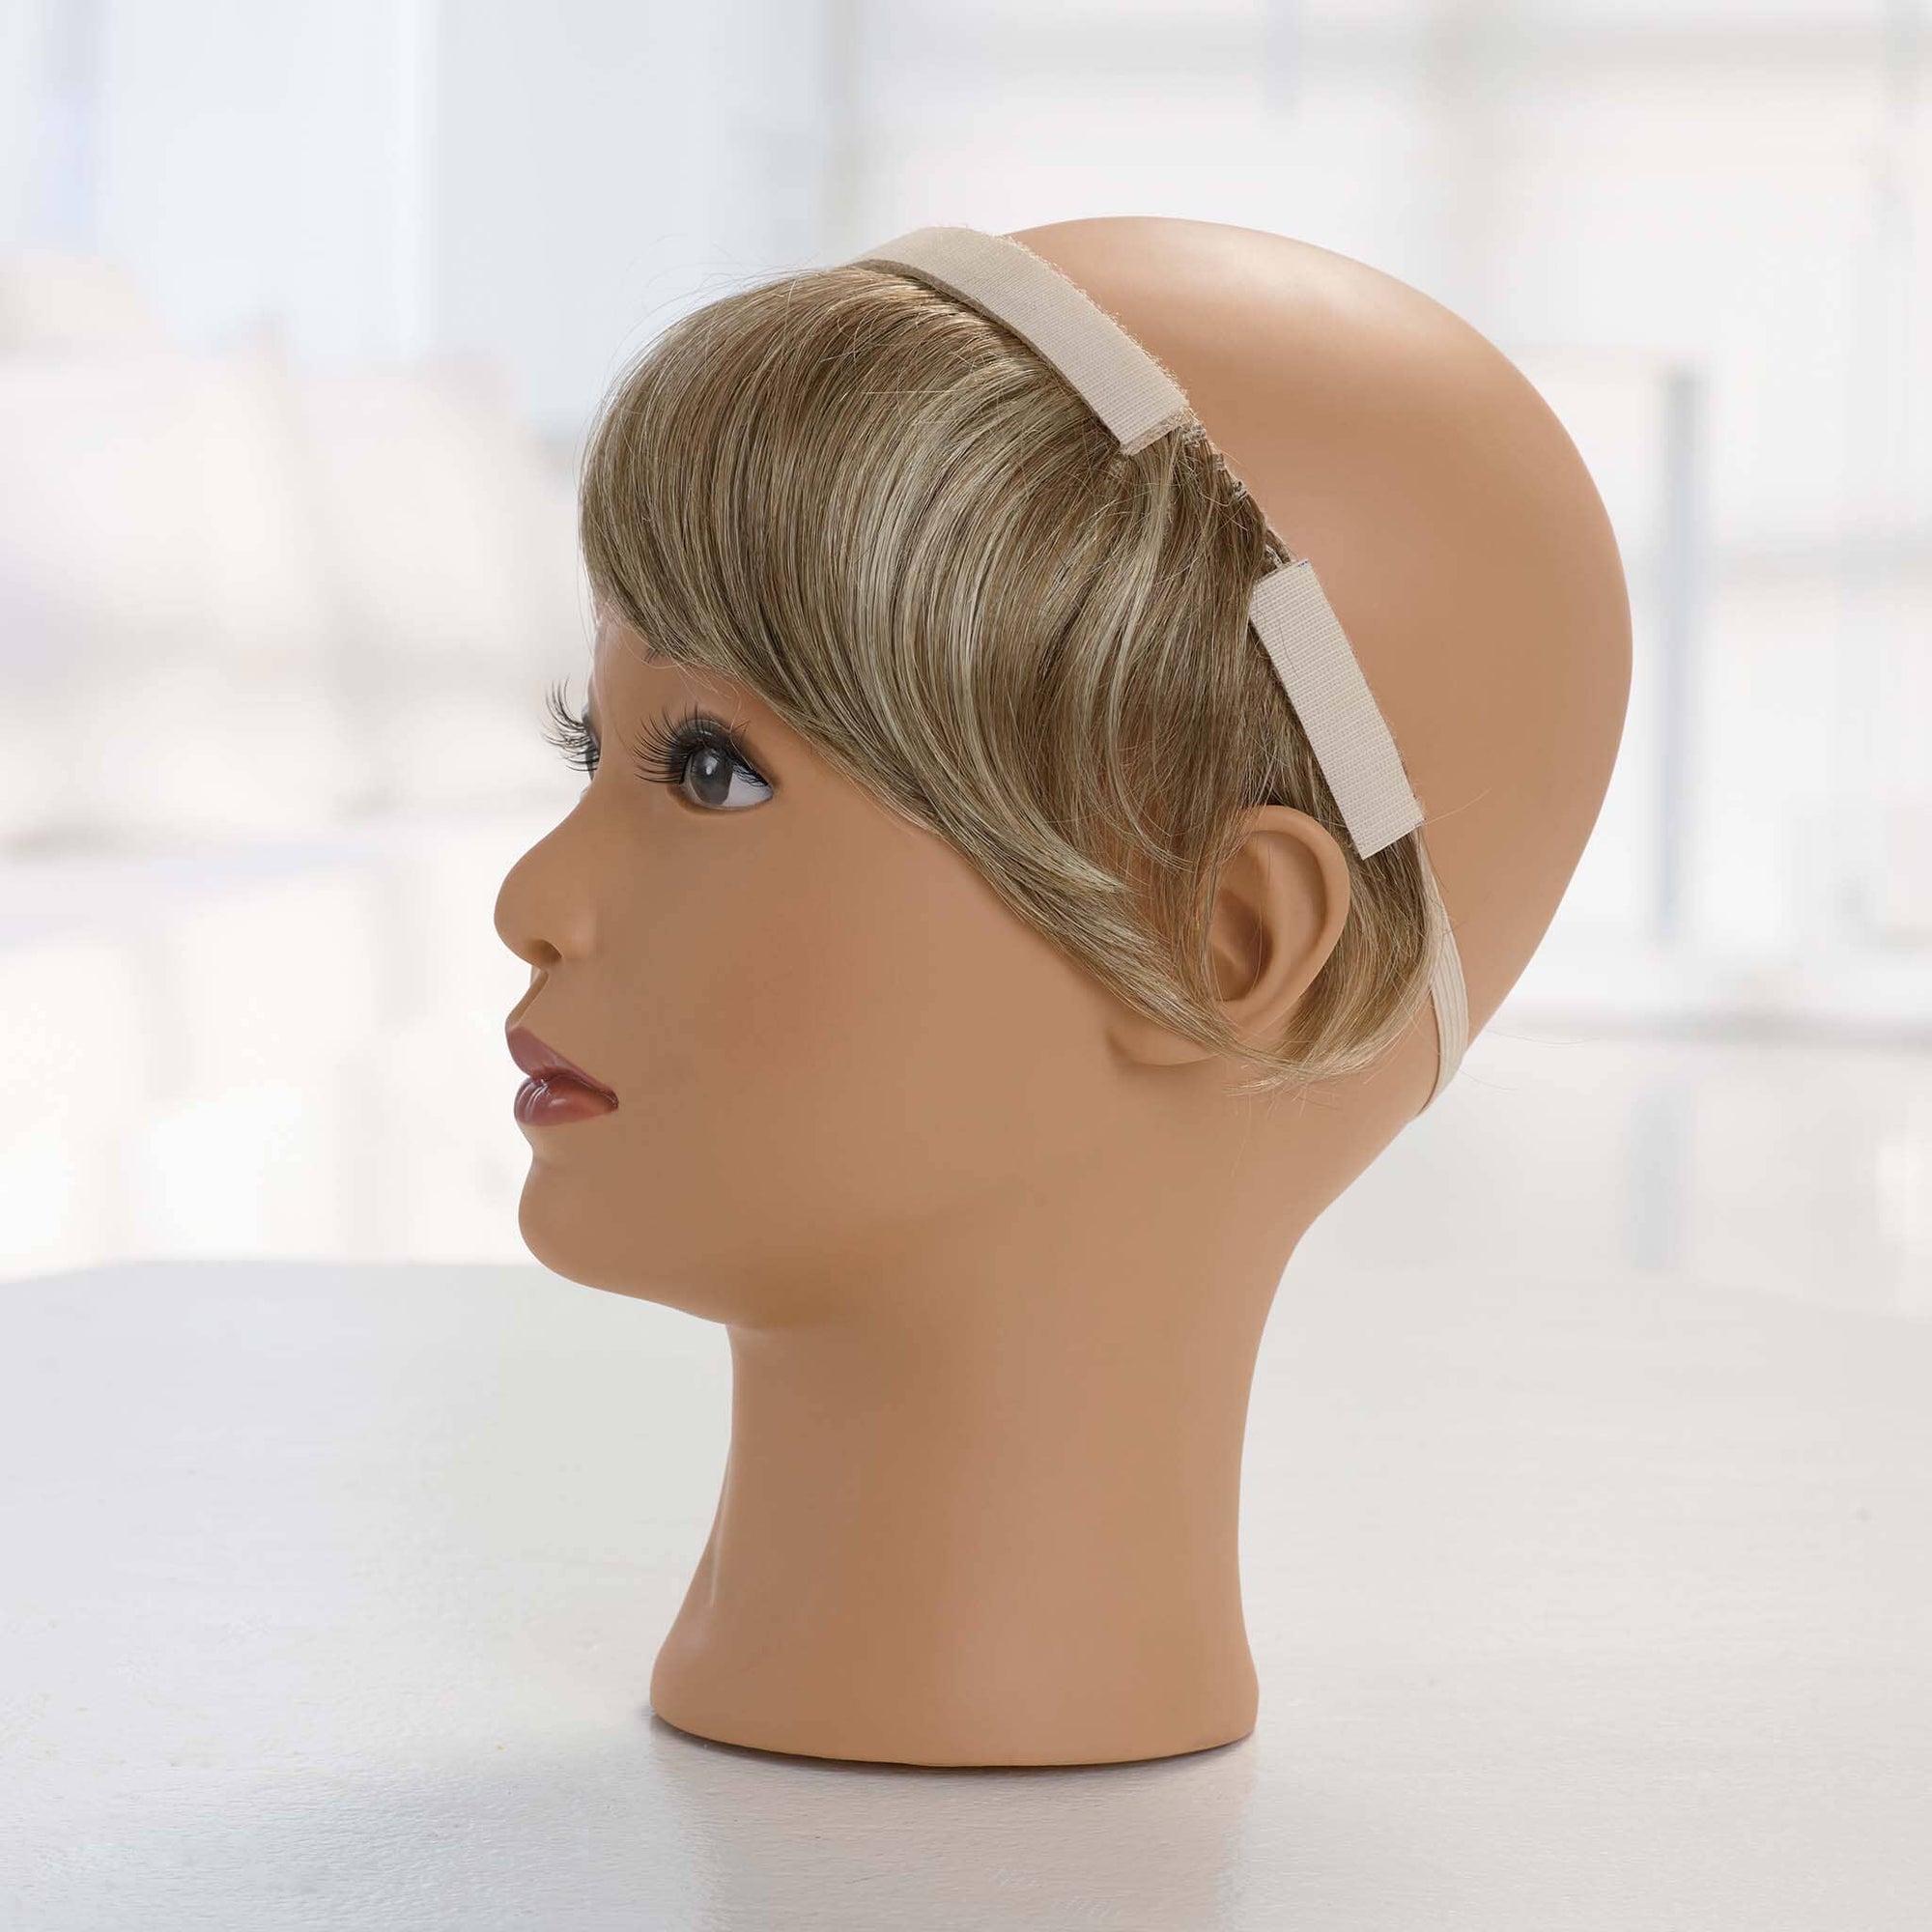 Add-a-Bangs can also be worn straight in the back.